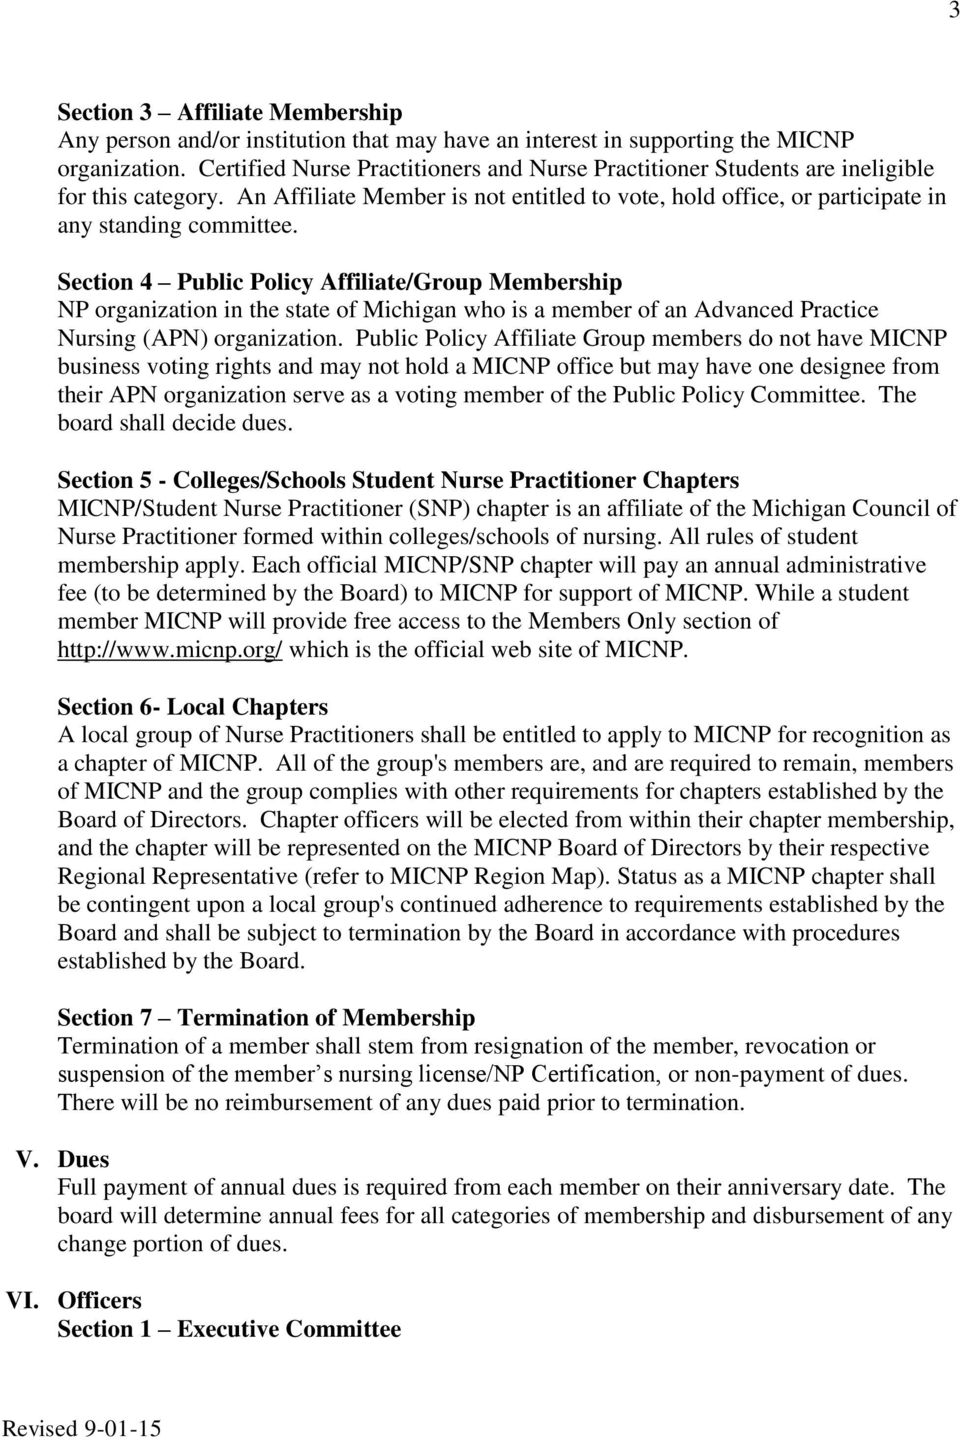 Section 4 Public Policy Affiliate/Group Membership NP organization in the state of Michigan who is a member of an Advanced Practice Nursing (APN) organization.